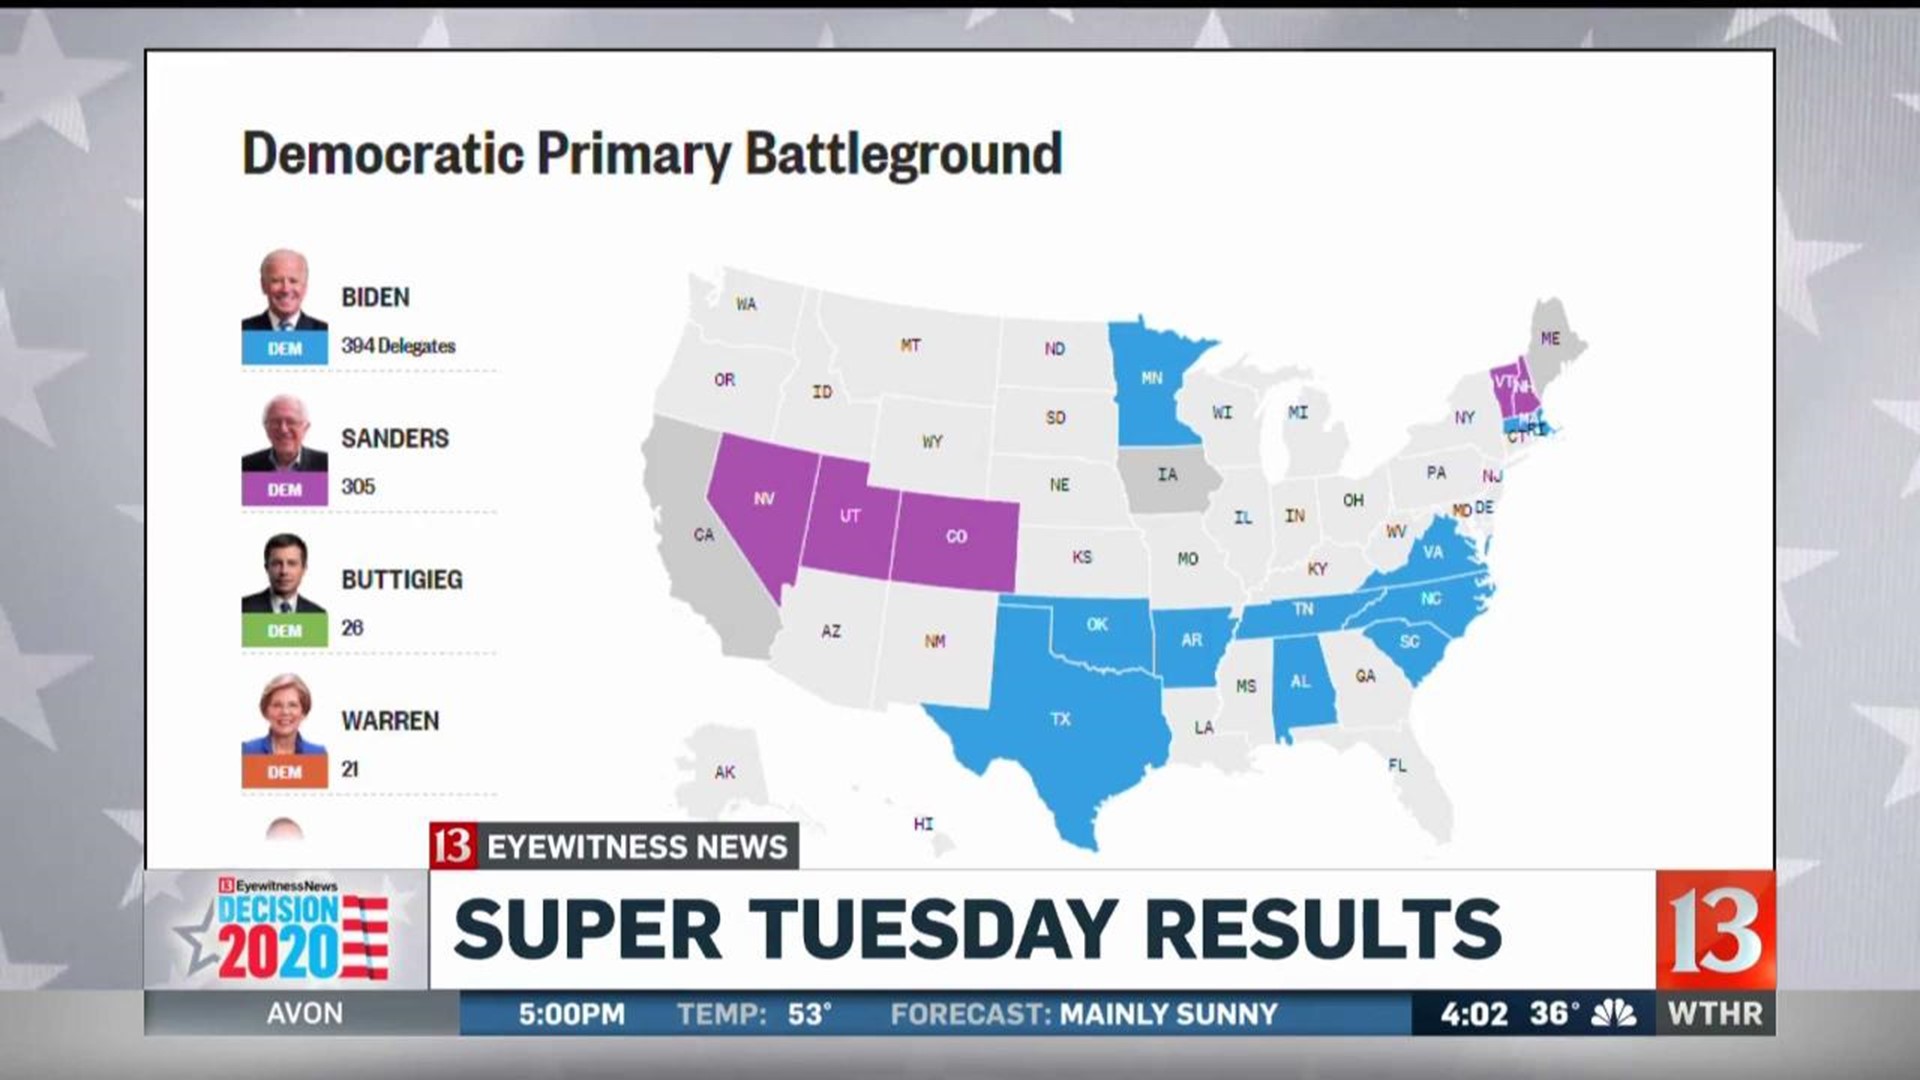 Super Tuesday results Biden takes 10 states, Sanders takes 4